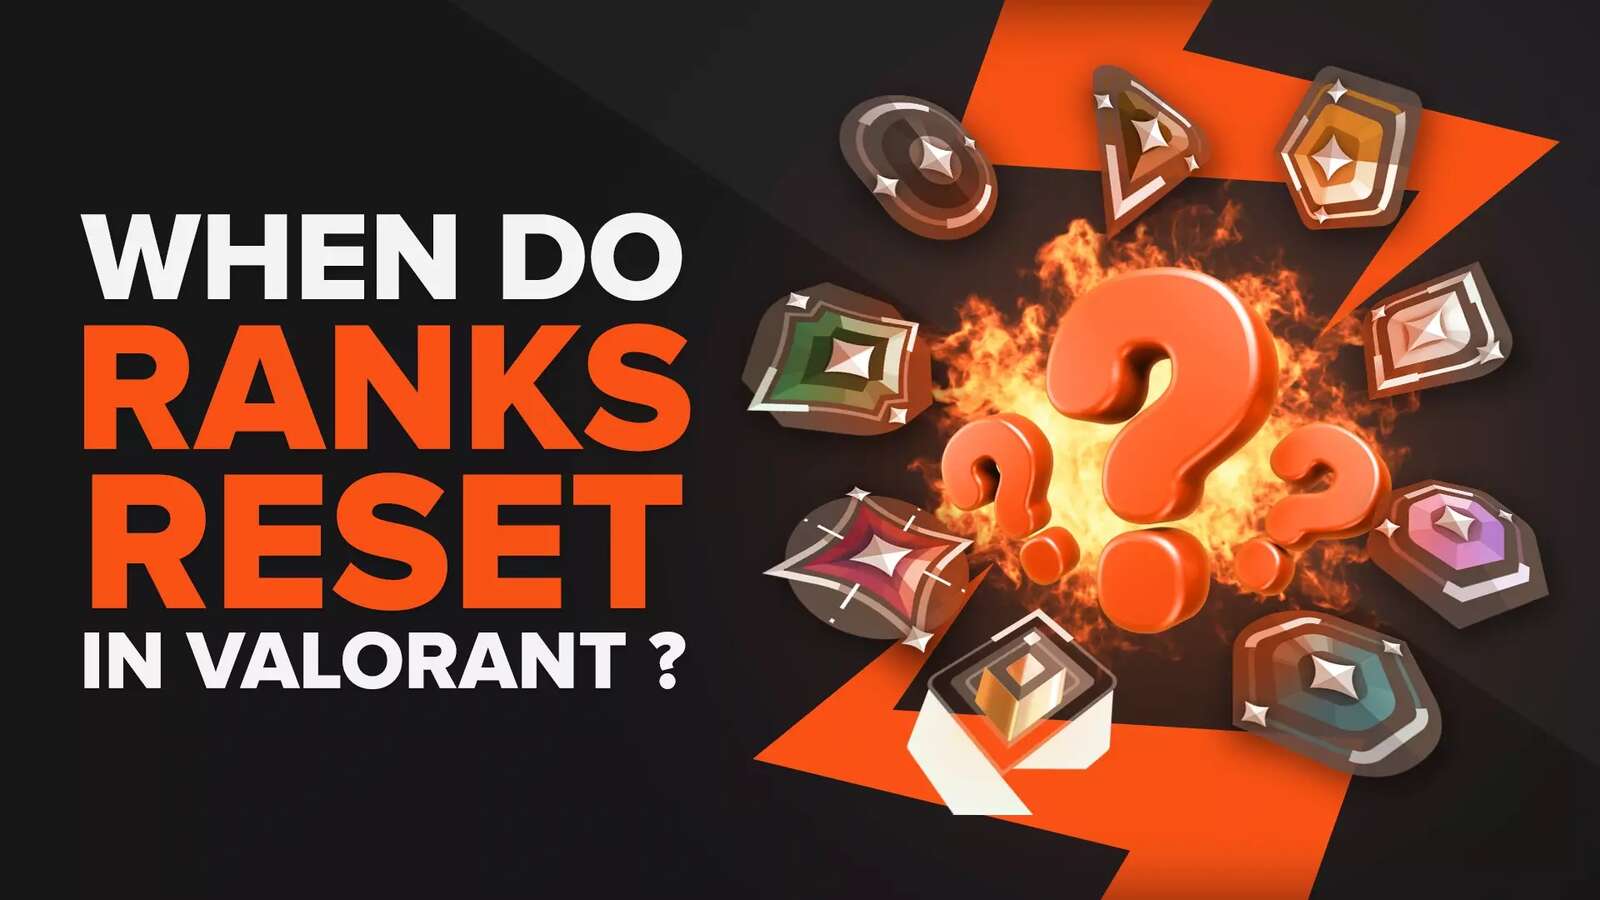 When Do Ranks Reset In Valorant? [Answered]